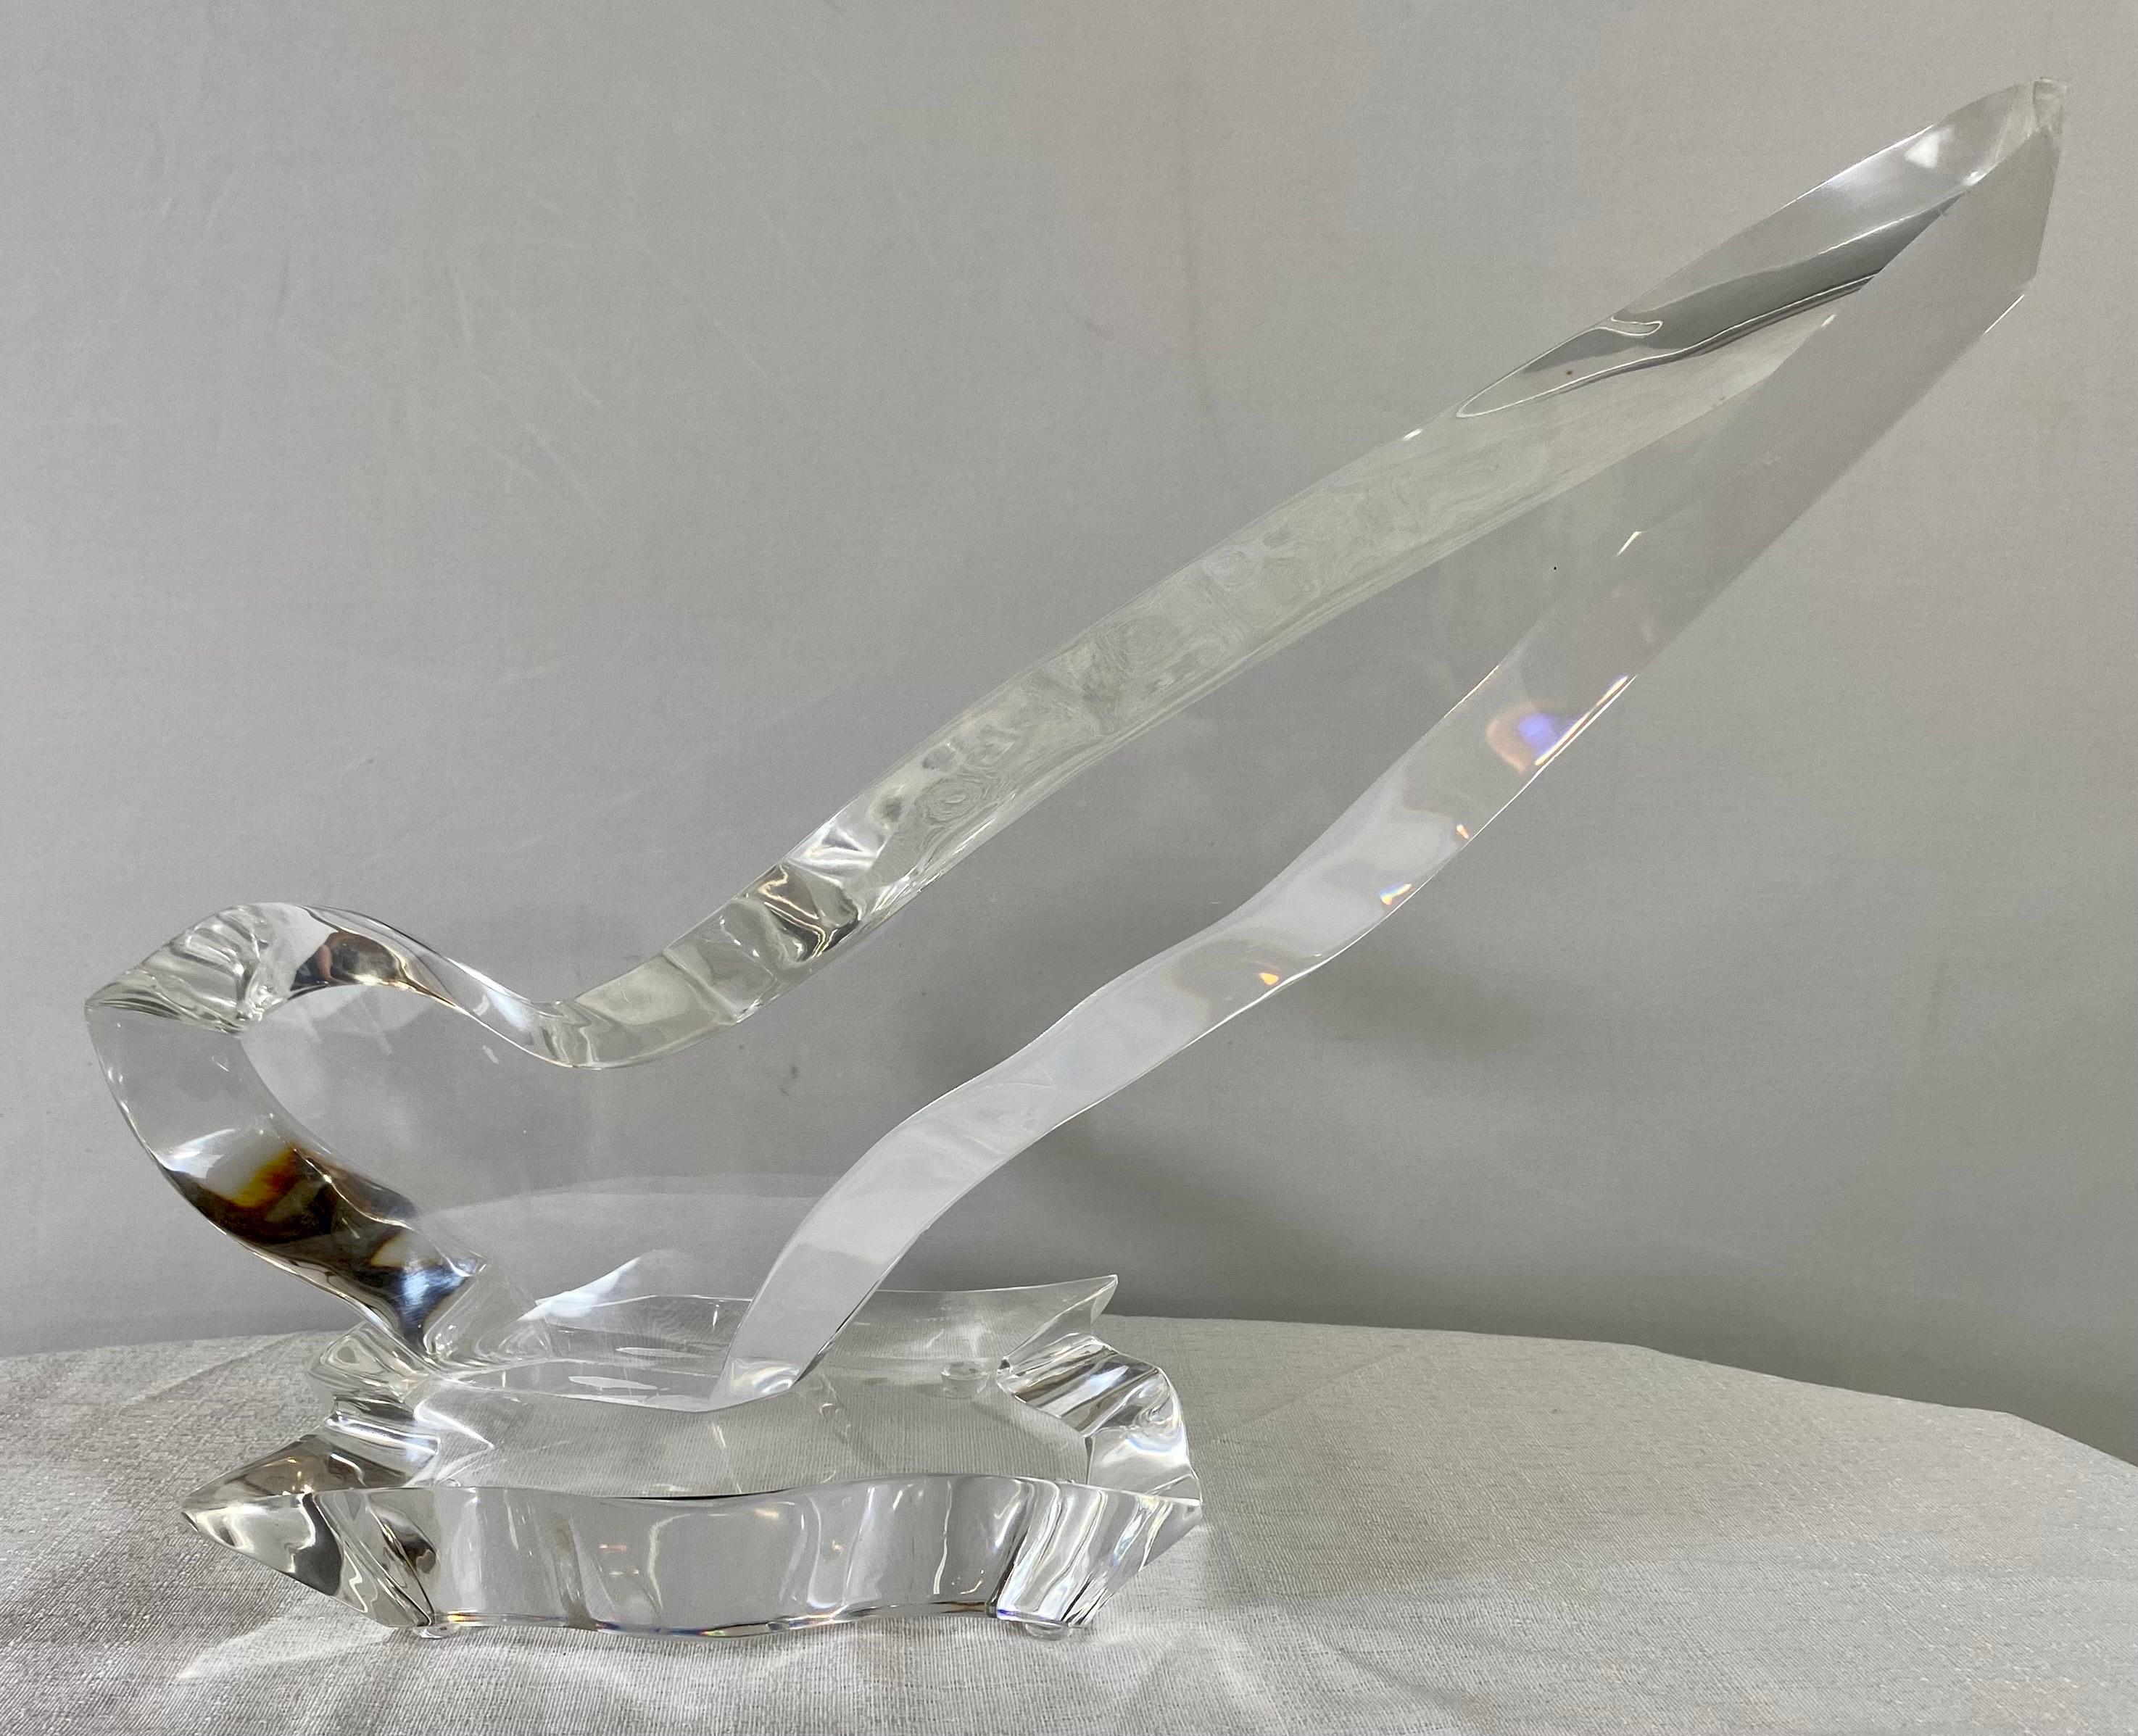 A modersnist abstract lucite sculpture by Eric Bauer ( American, 1963). The sculpture in a shape of a bird is raised by a lucite base and it is signed by the artist Eric Bauer and numbered 93/350.  The sculpture is modern and elegant and will add